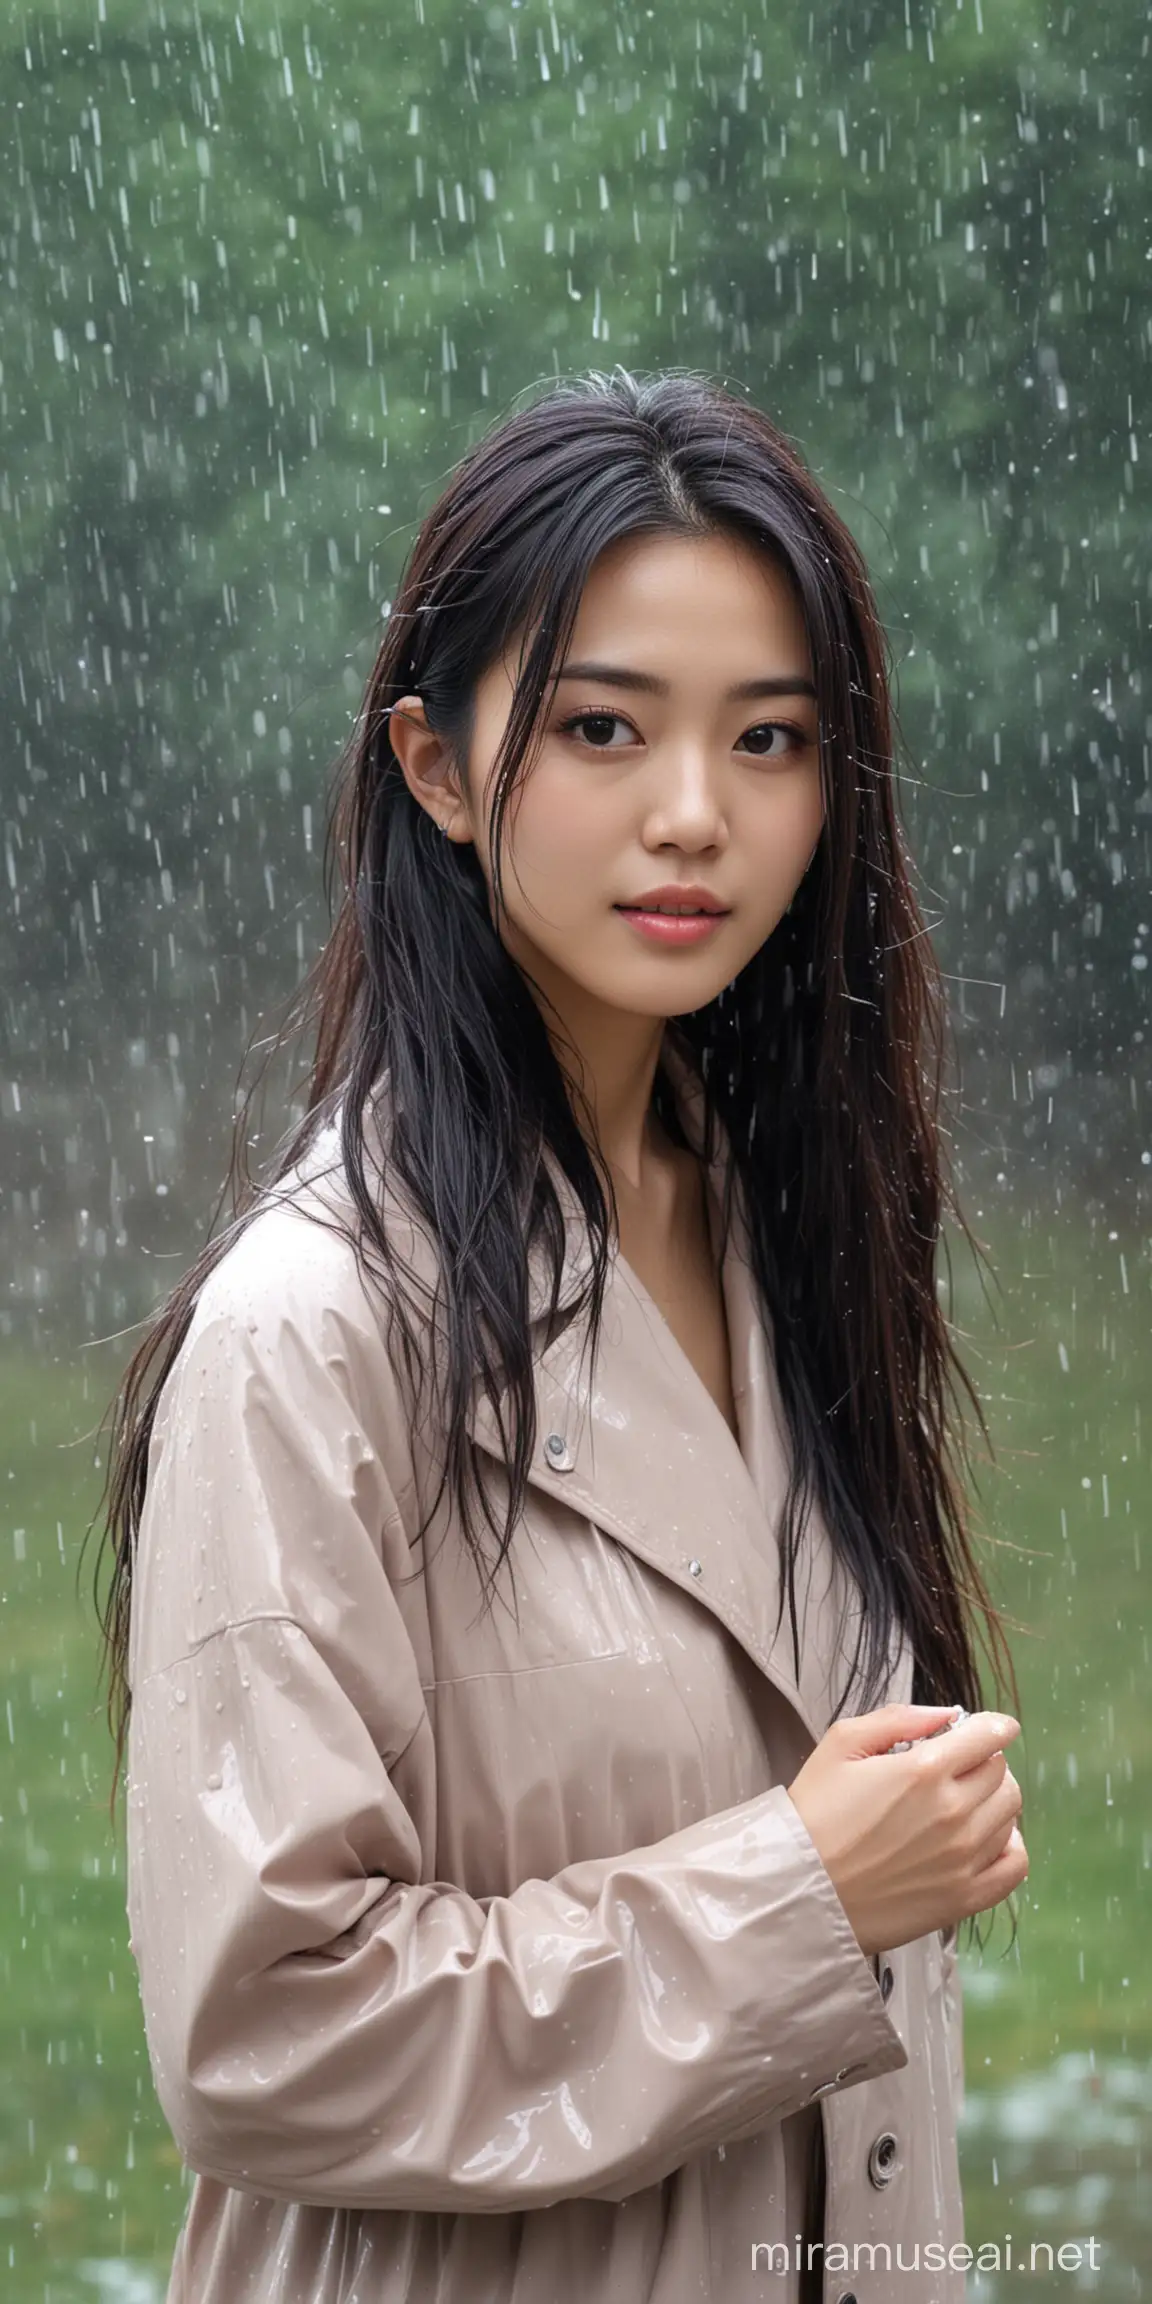 Chinese Woman Embracing the Rain in Park